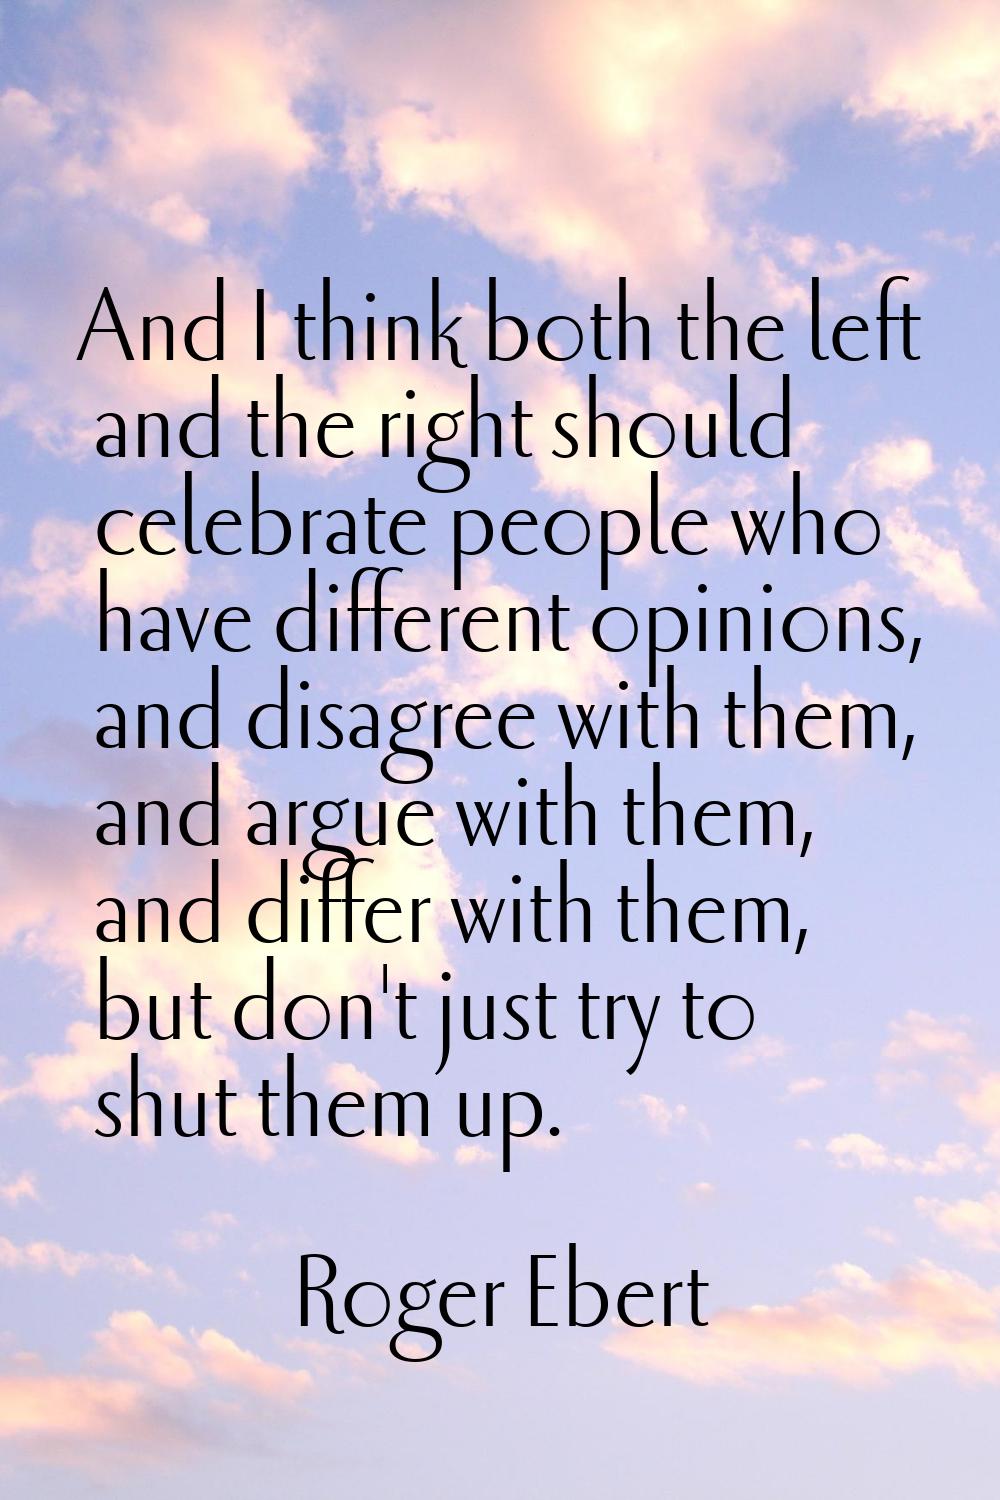 And I think both the left and the right should celebrate people who have different opinions, and di